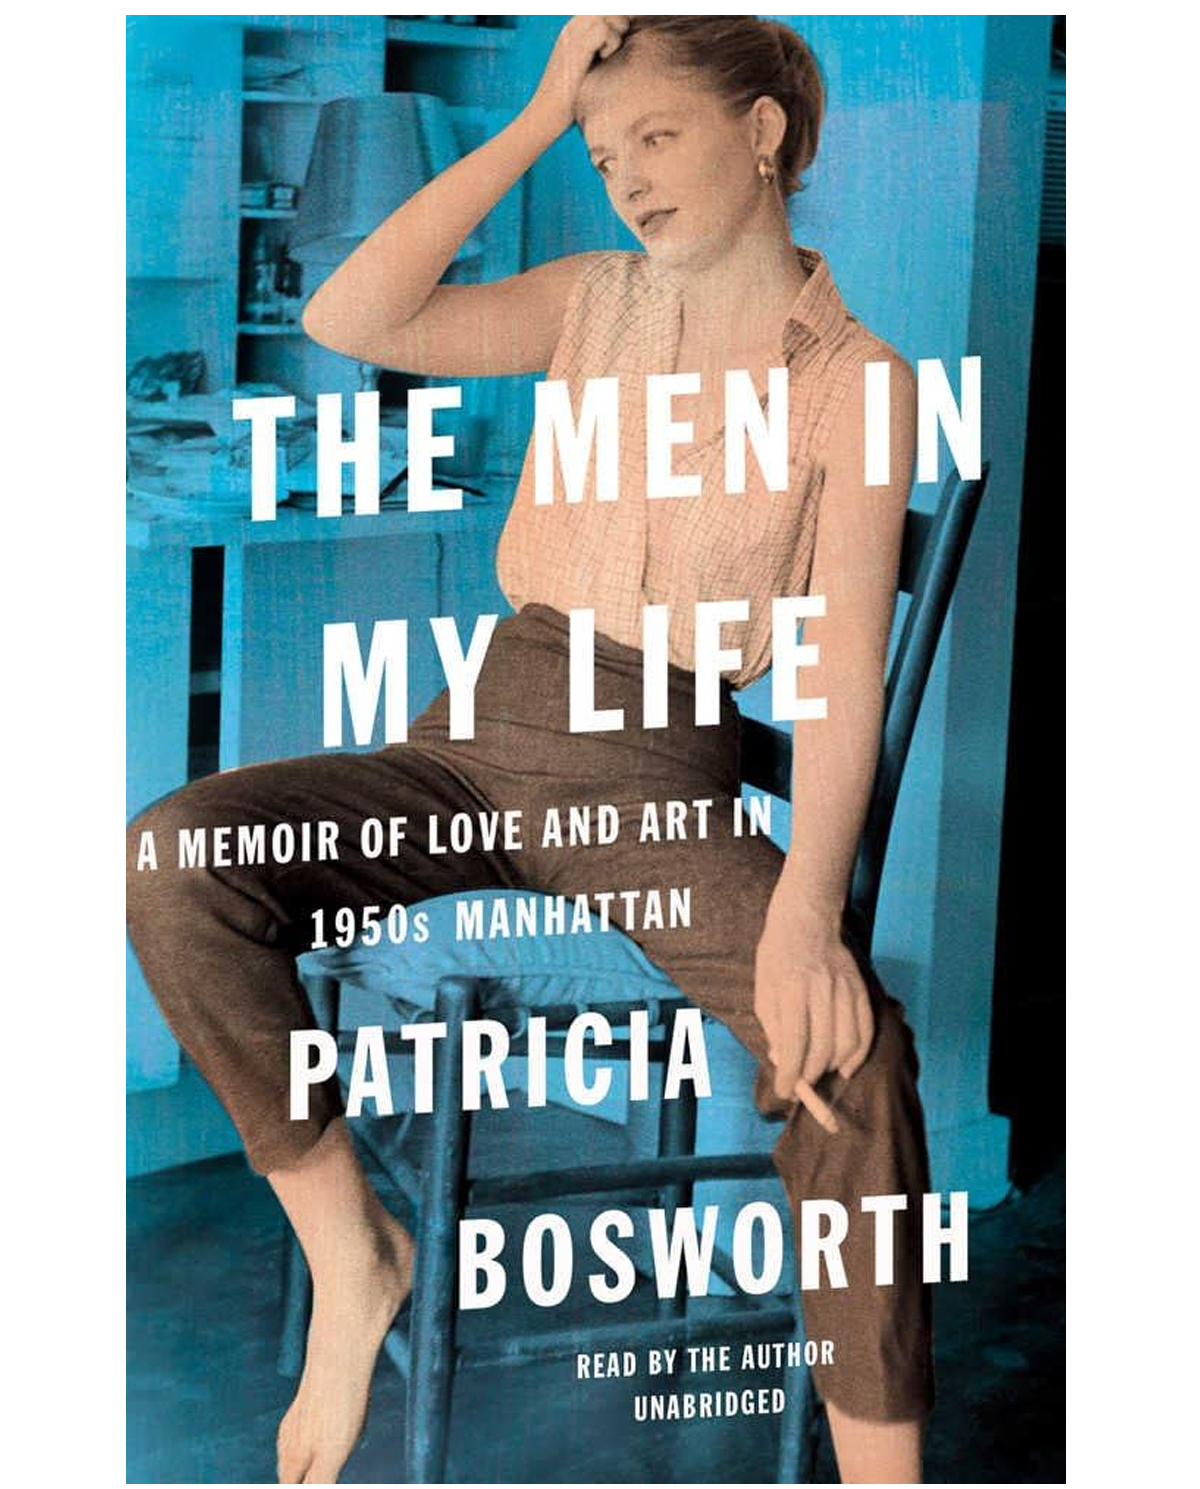 Patricia Bosworth, author of The Men in my Life at the Milford Readers and Writers Festival